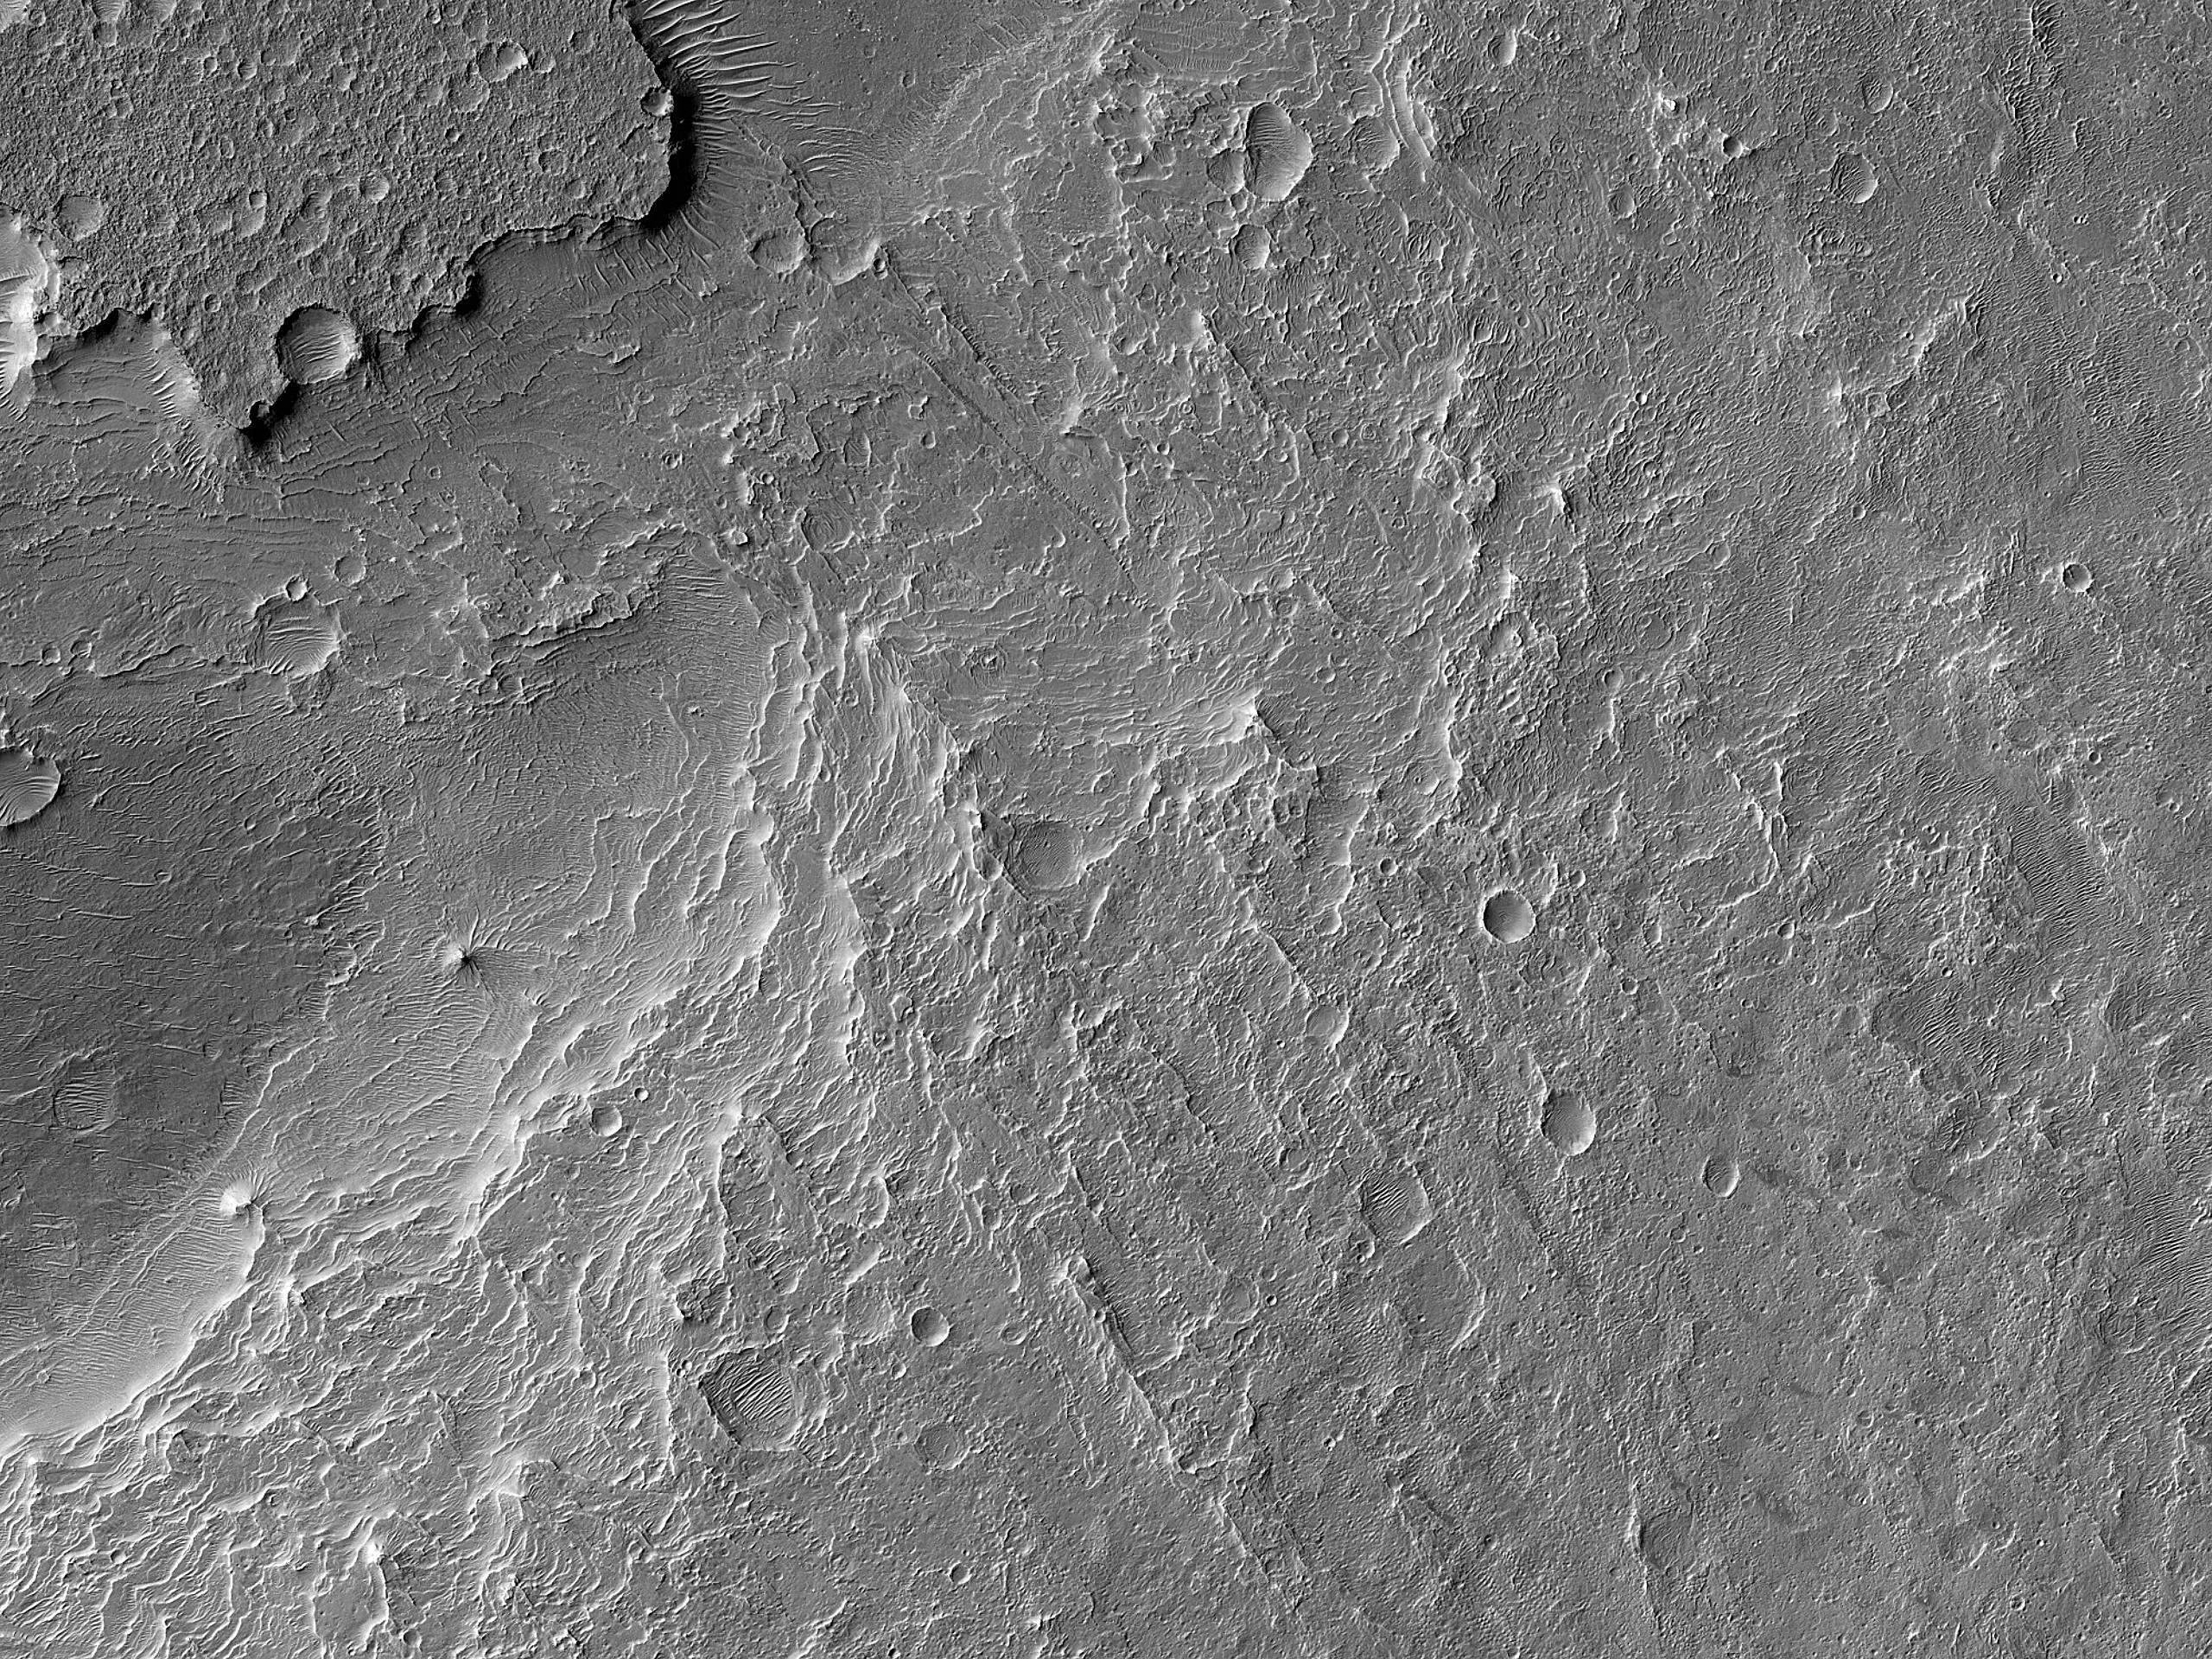 Measure Orientations of Layers in Luba Crater